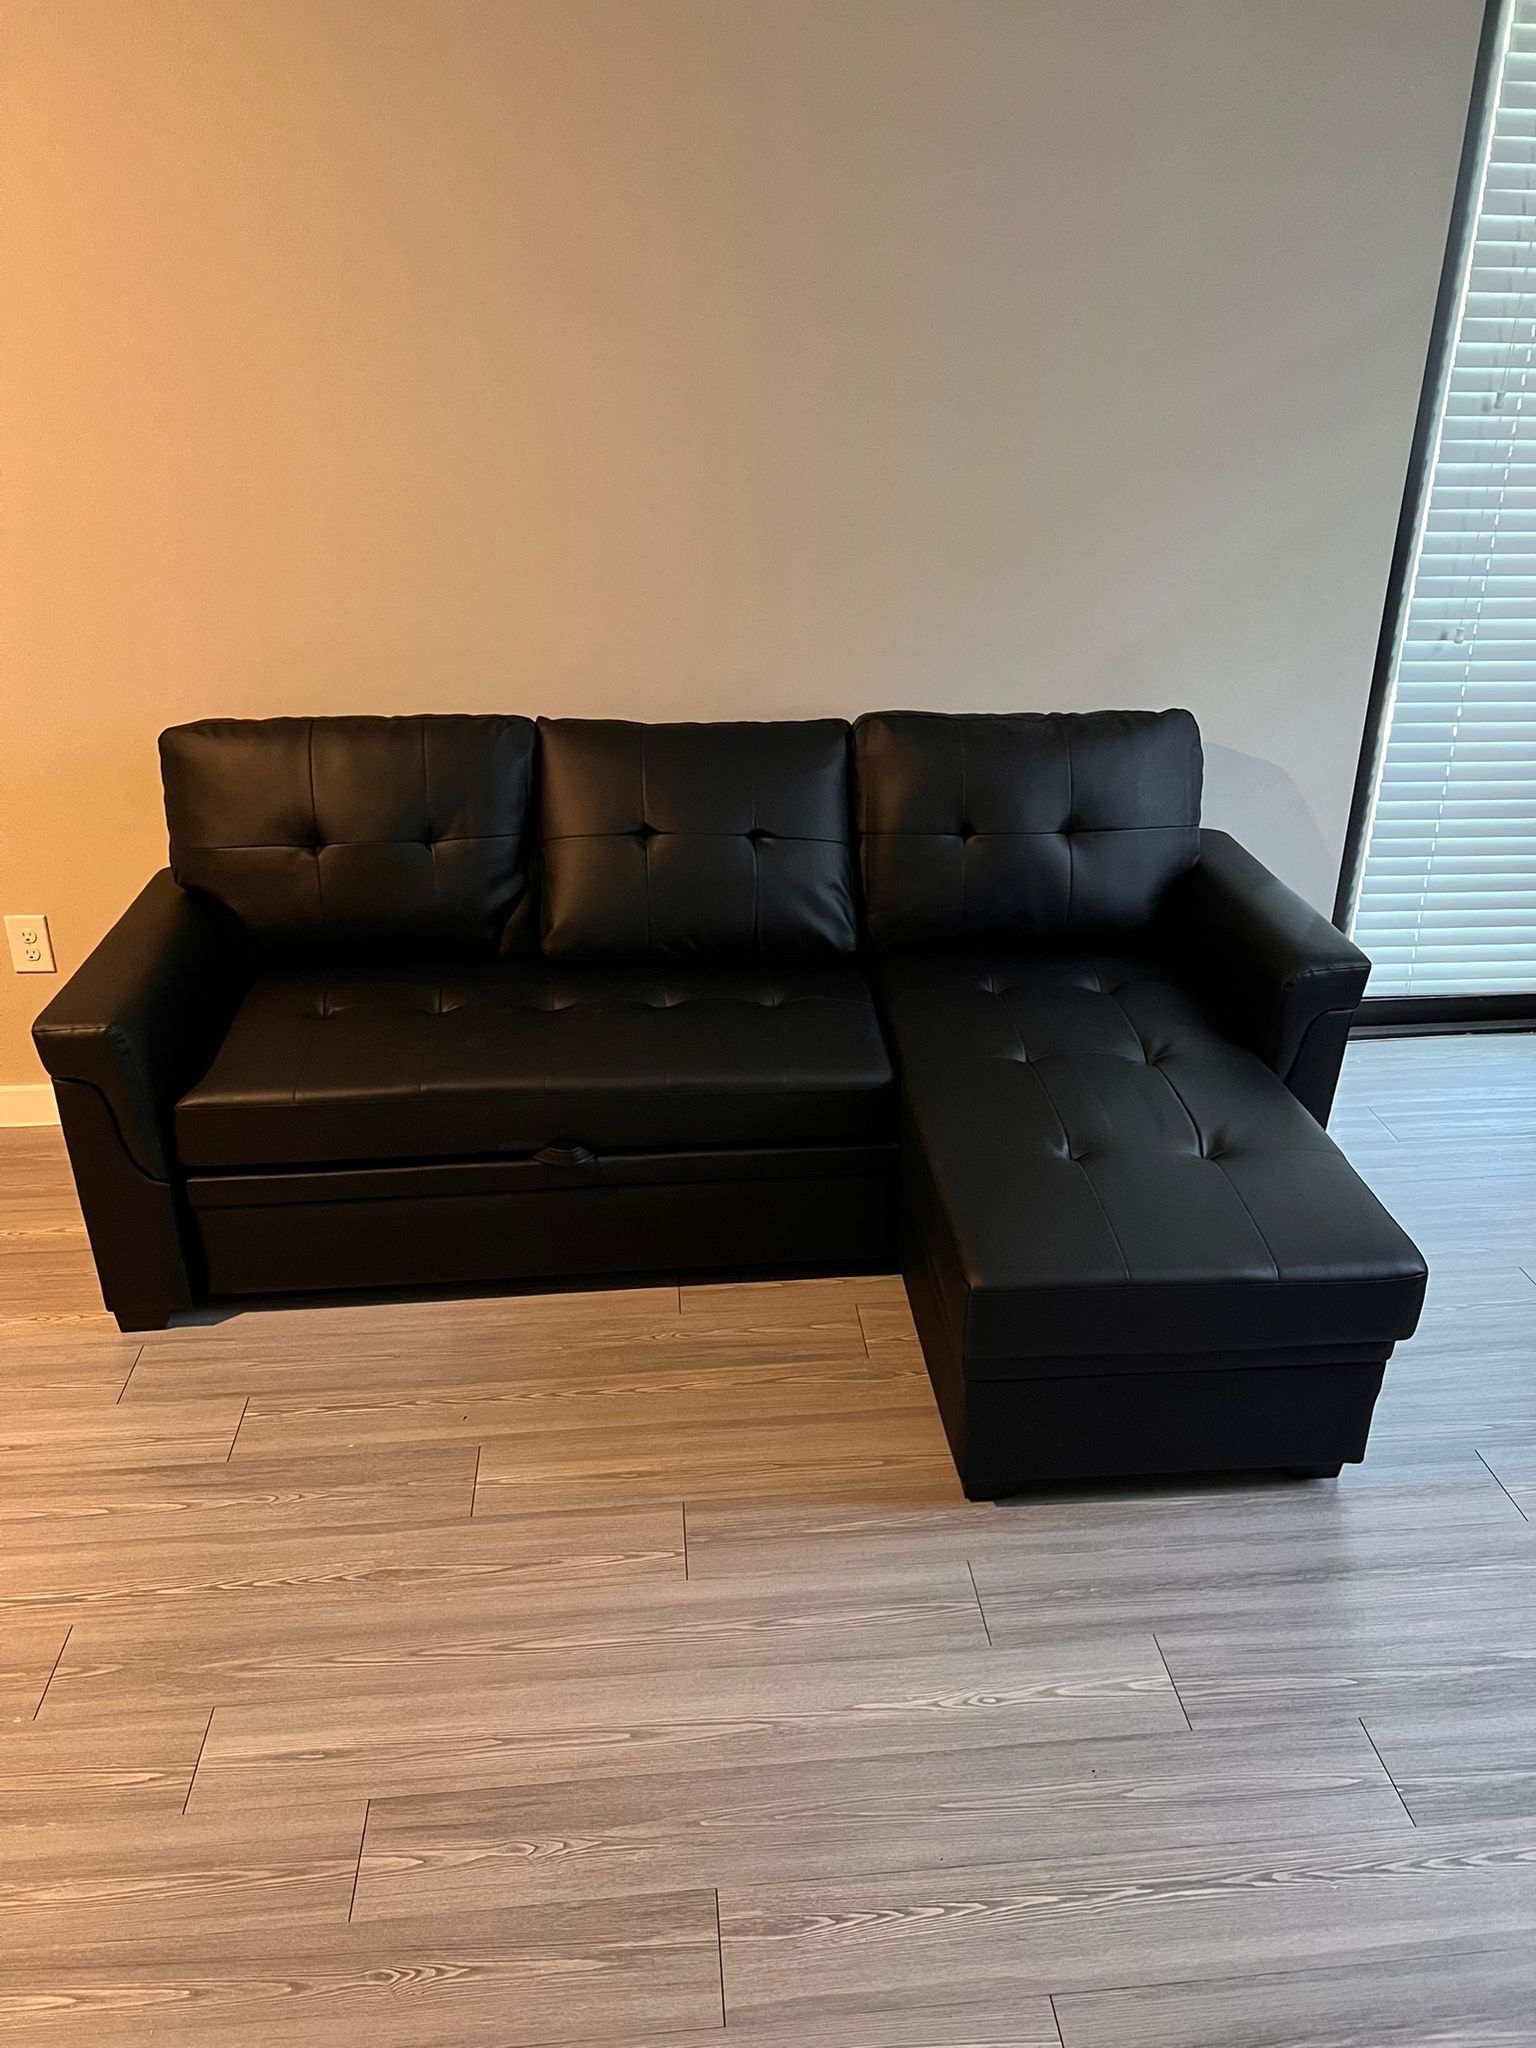 Brand New Sectional Sleeper with Storage … Delivery Available 🚚